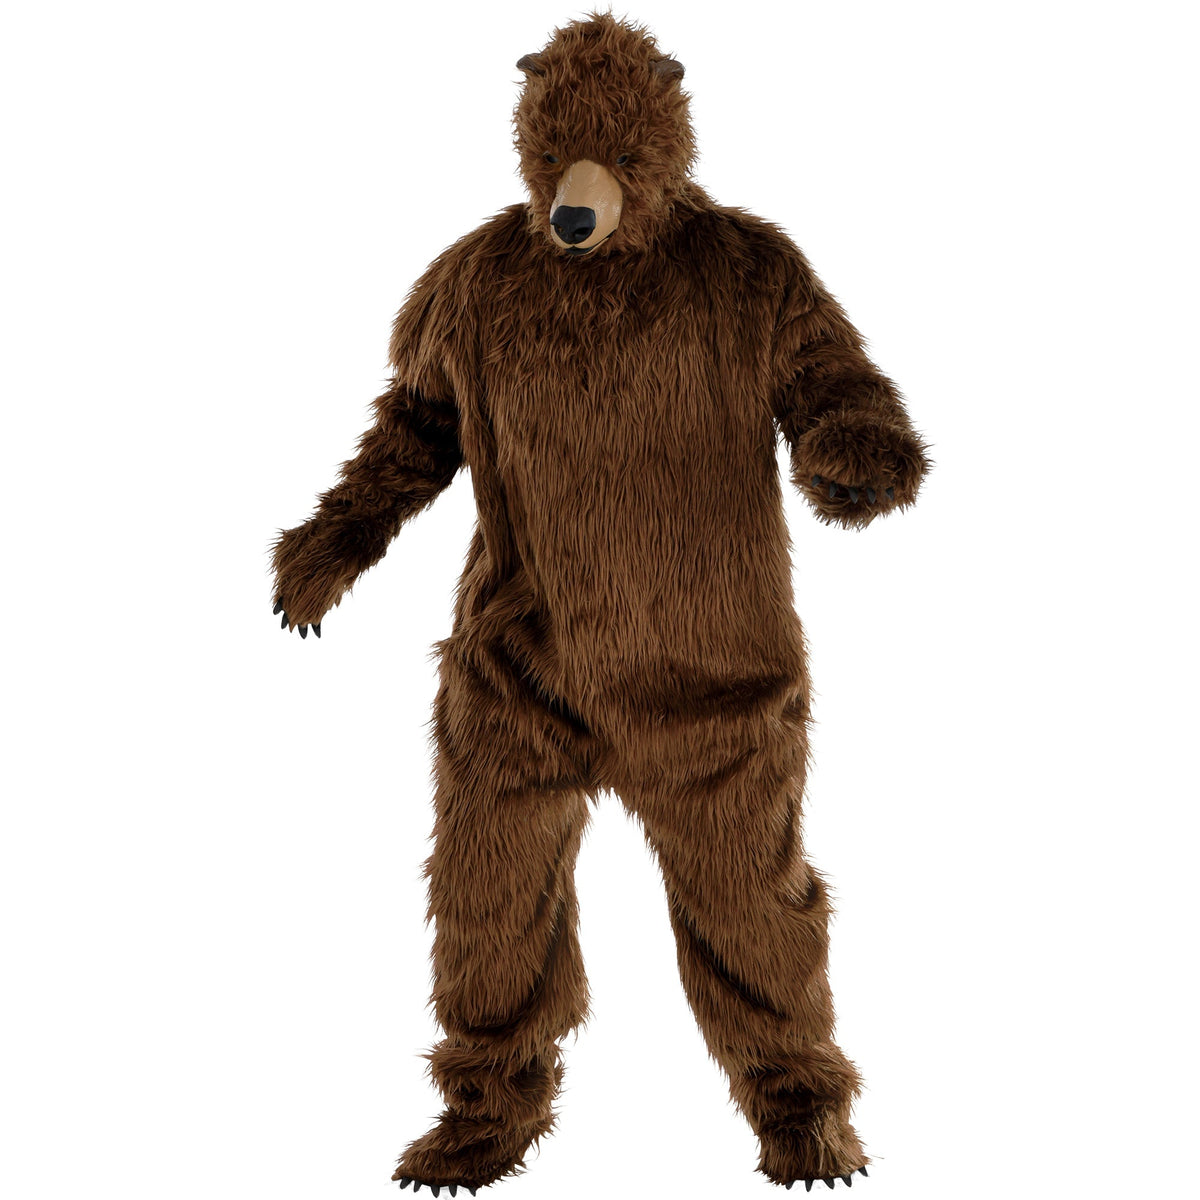 HALLOWEEN COSTUME CO. Costumes Bear Costume for Adults, Jumpsuit